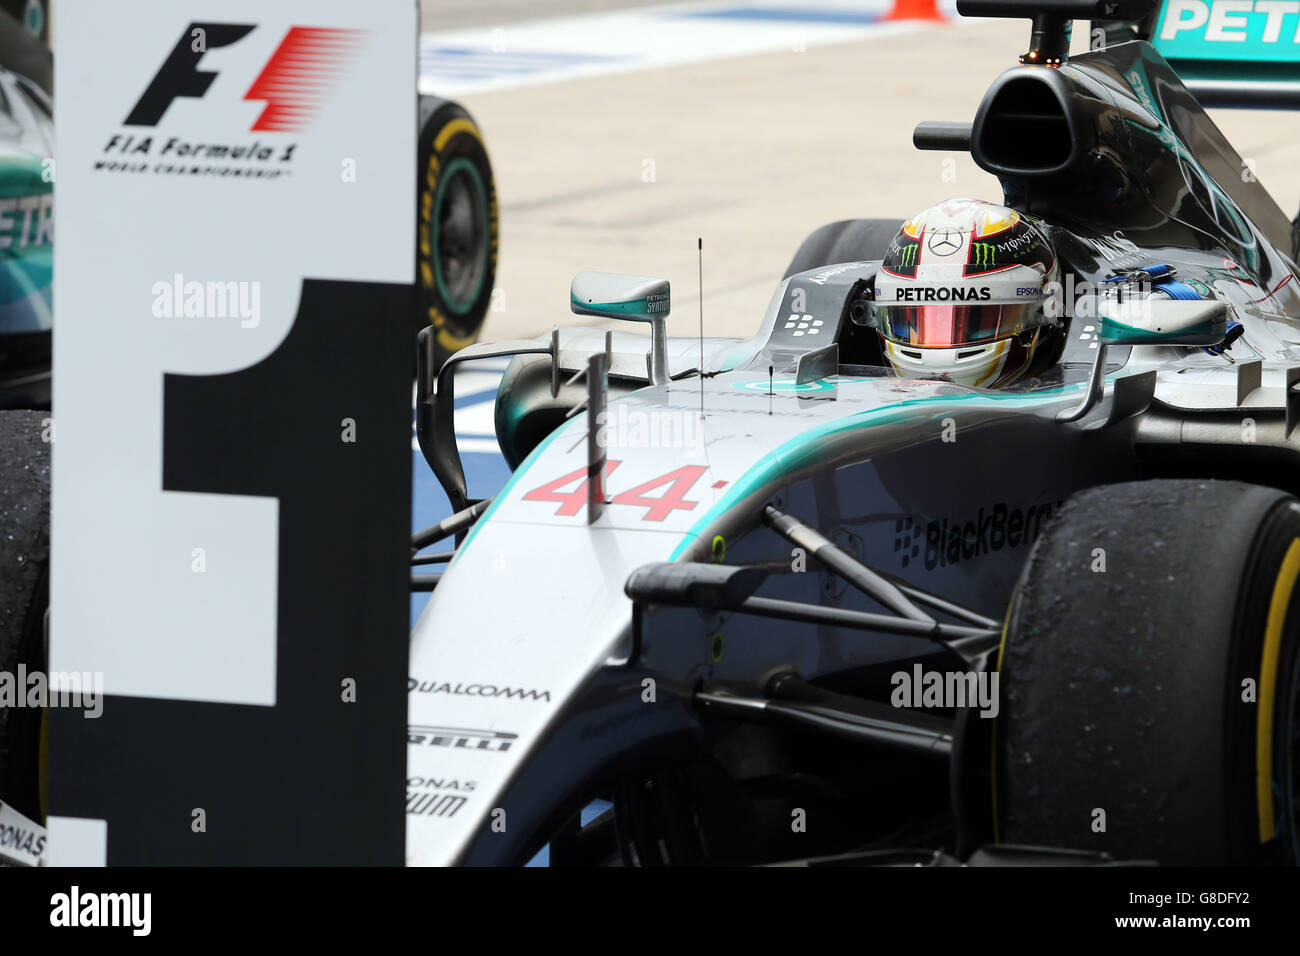 Mercedes' Lewis Hamilton parks his car in the number one spot after winning the United States Grand Prix and the 2015 Formula One World Championship after the United States Grand Prix at the Circuit of The Americas in Austin, Texas, USA. Stock Photo